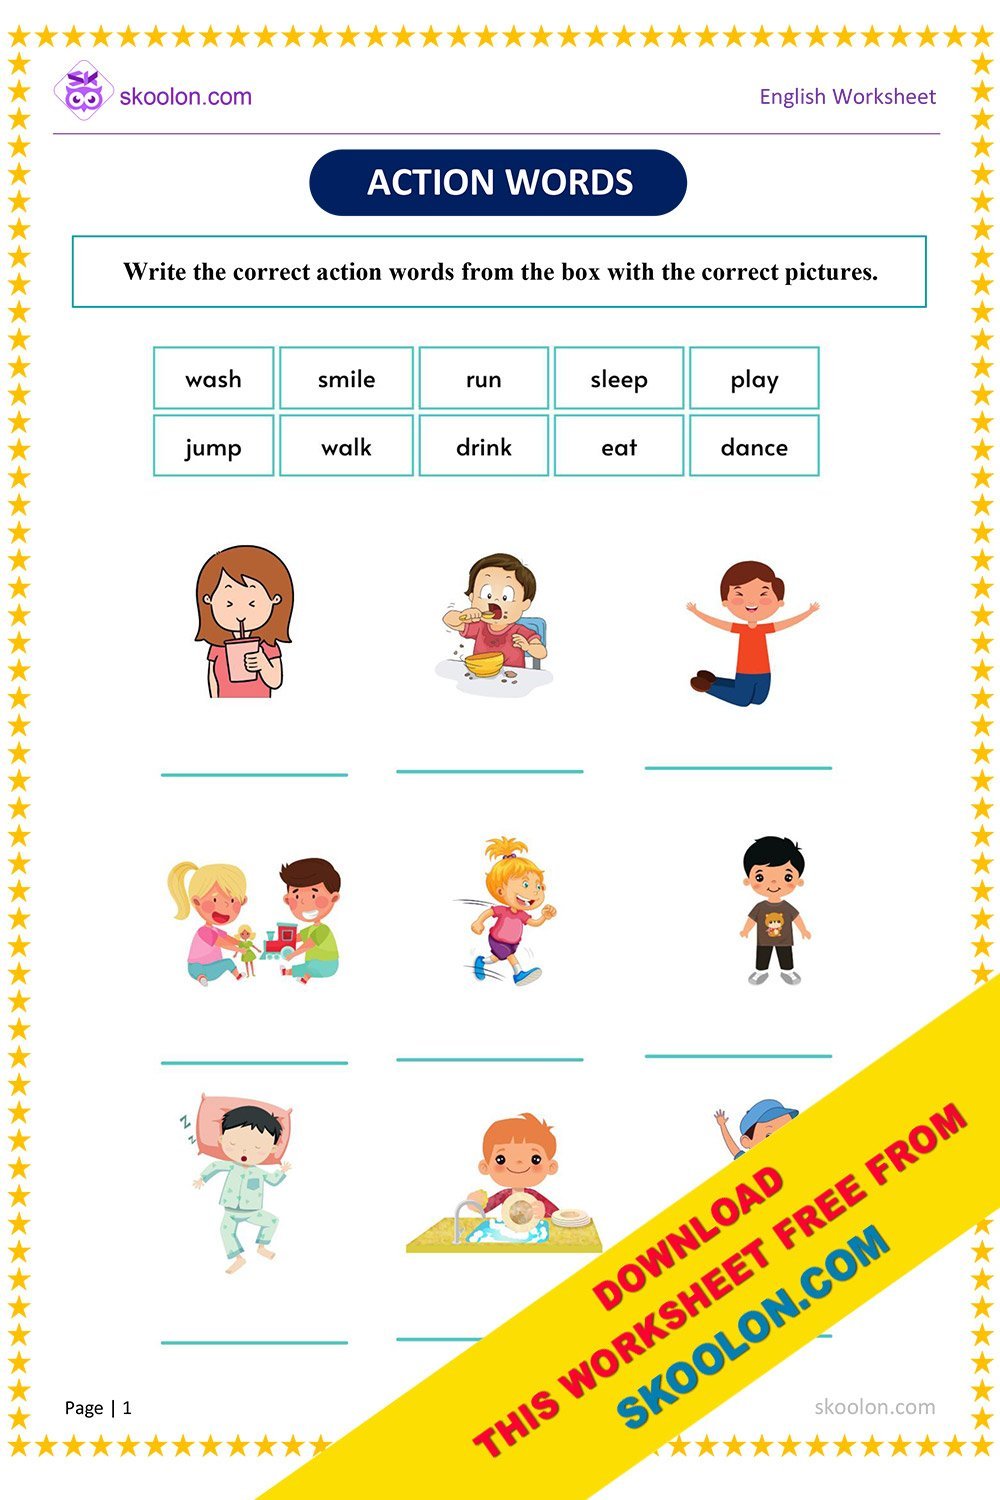 Action Words Worksheet For Class 2 With Answers